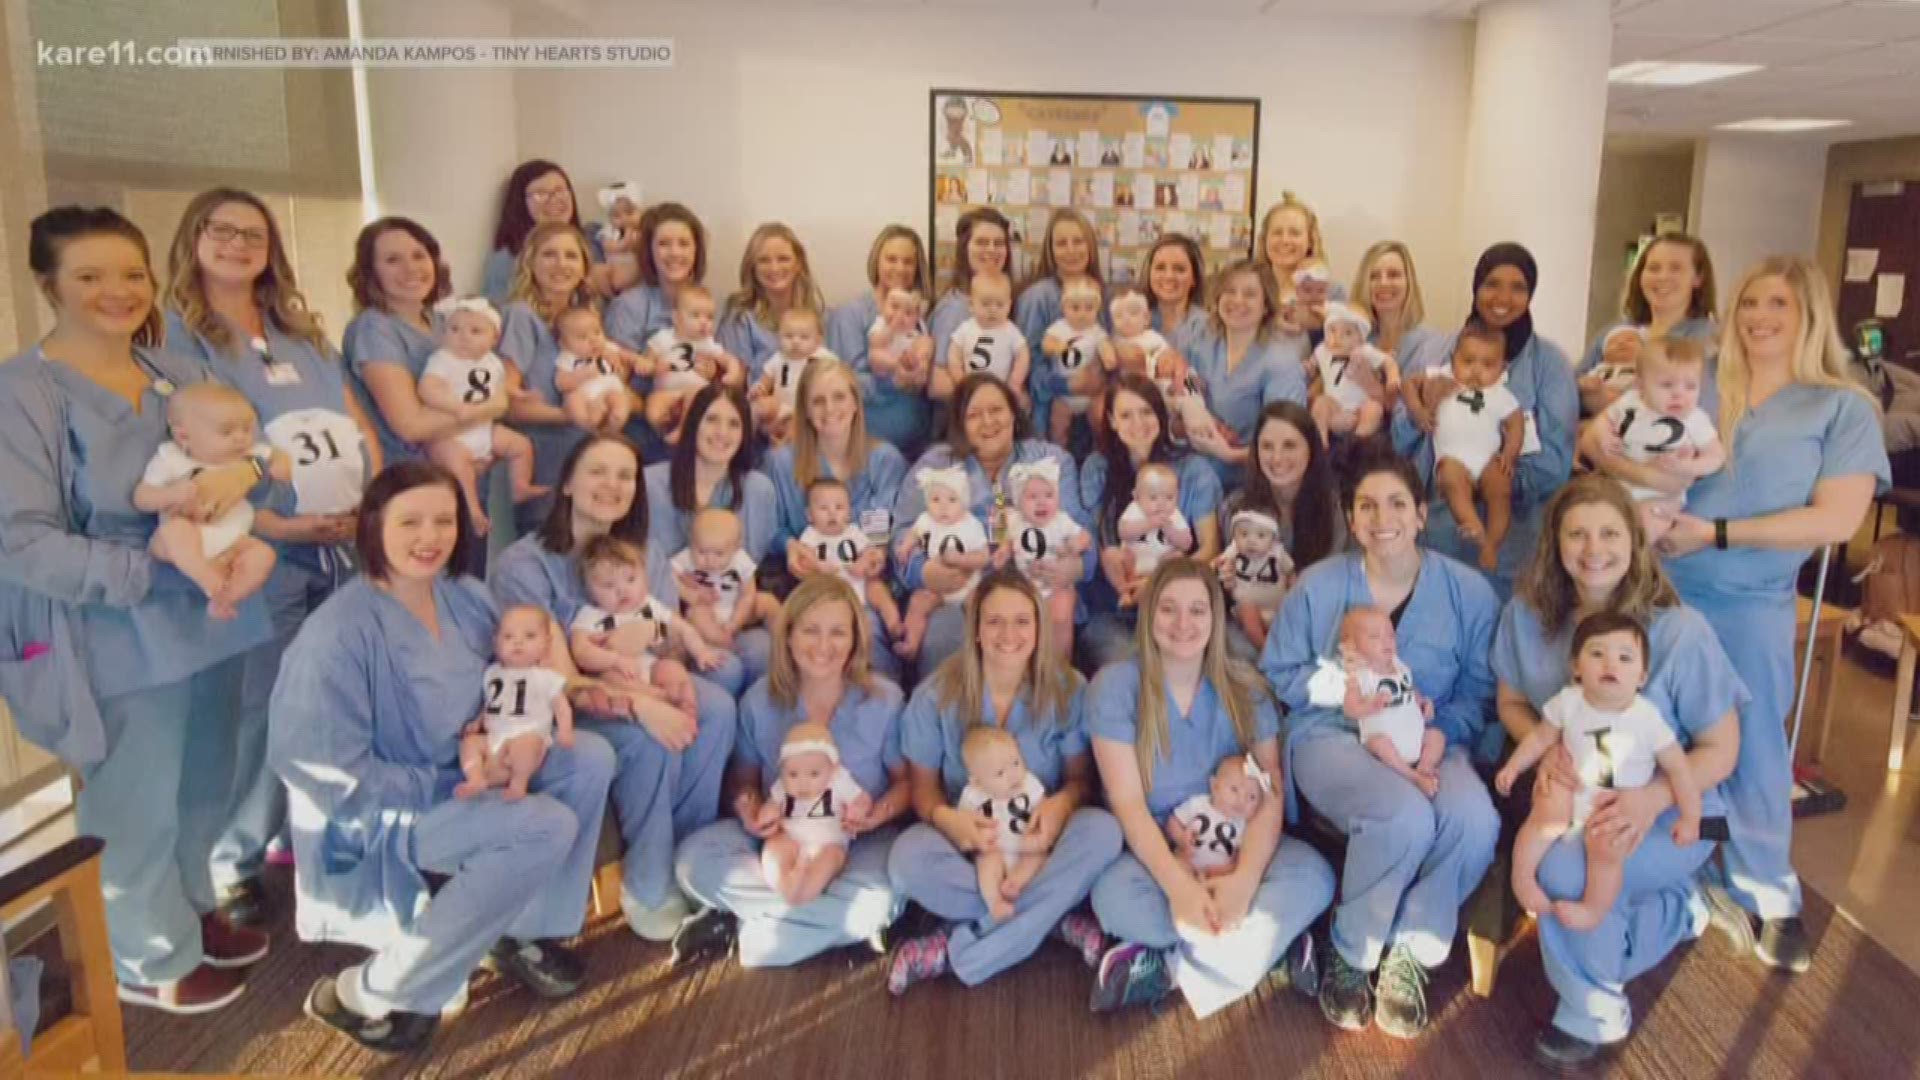 2018 was a boom year for babies at St. Cloud Hospital... and not just for the patients.
     KARE 11's Boyd Huppert shows us how the hospital's "Family Birthing Center" truly lived up to its name over the past year.